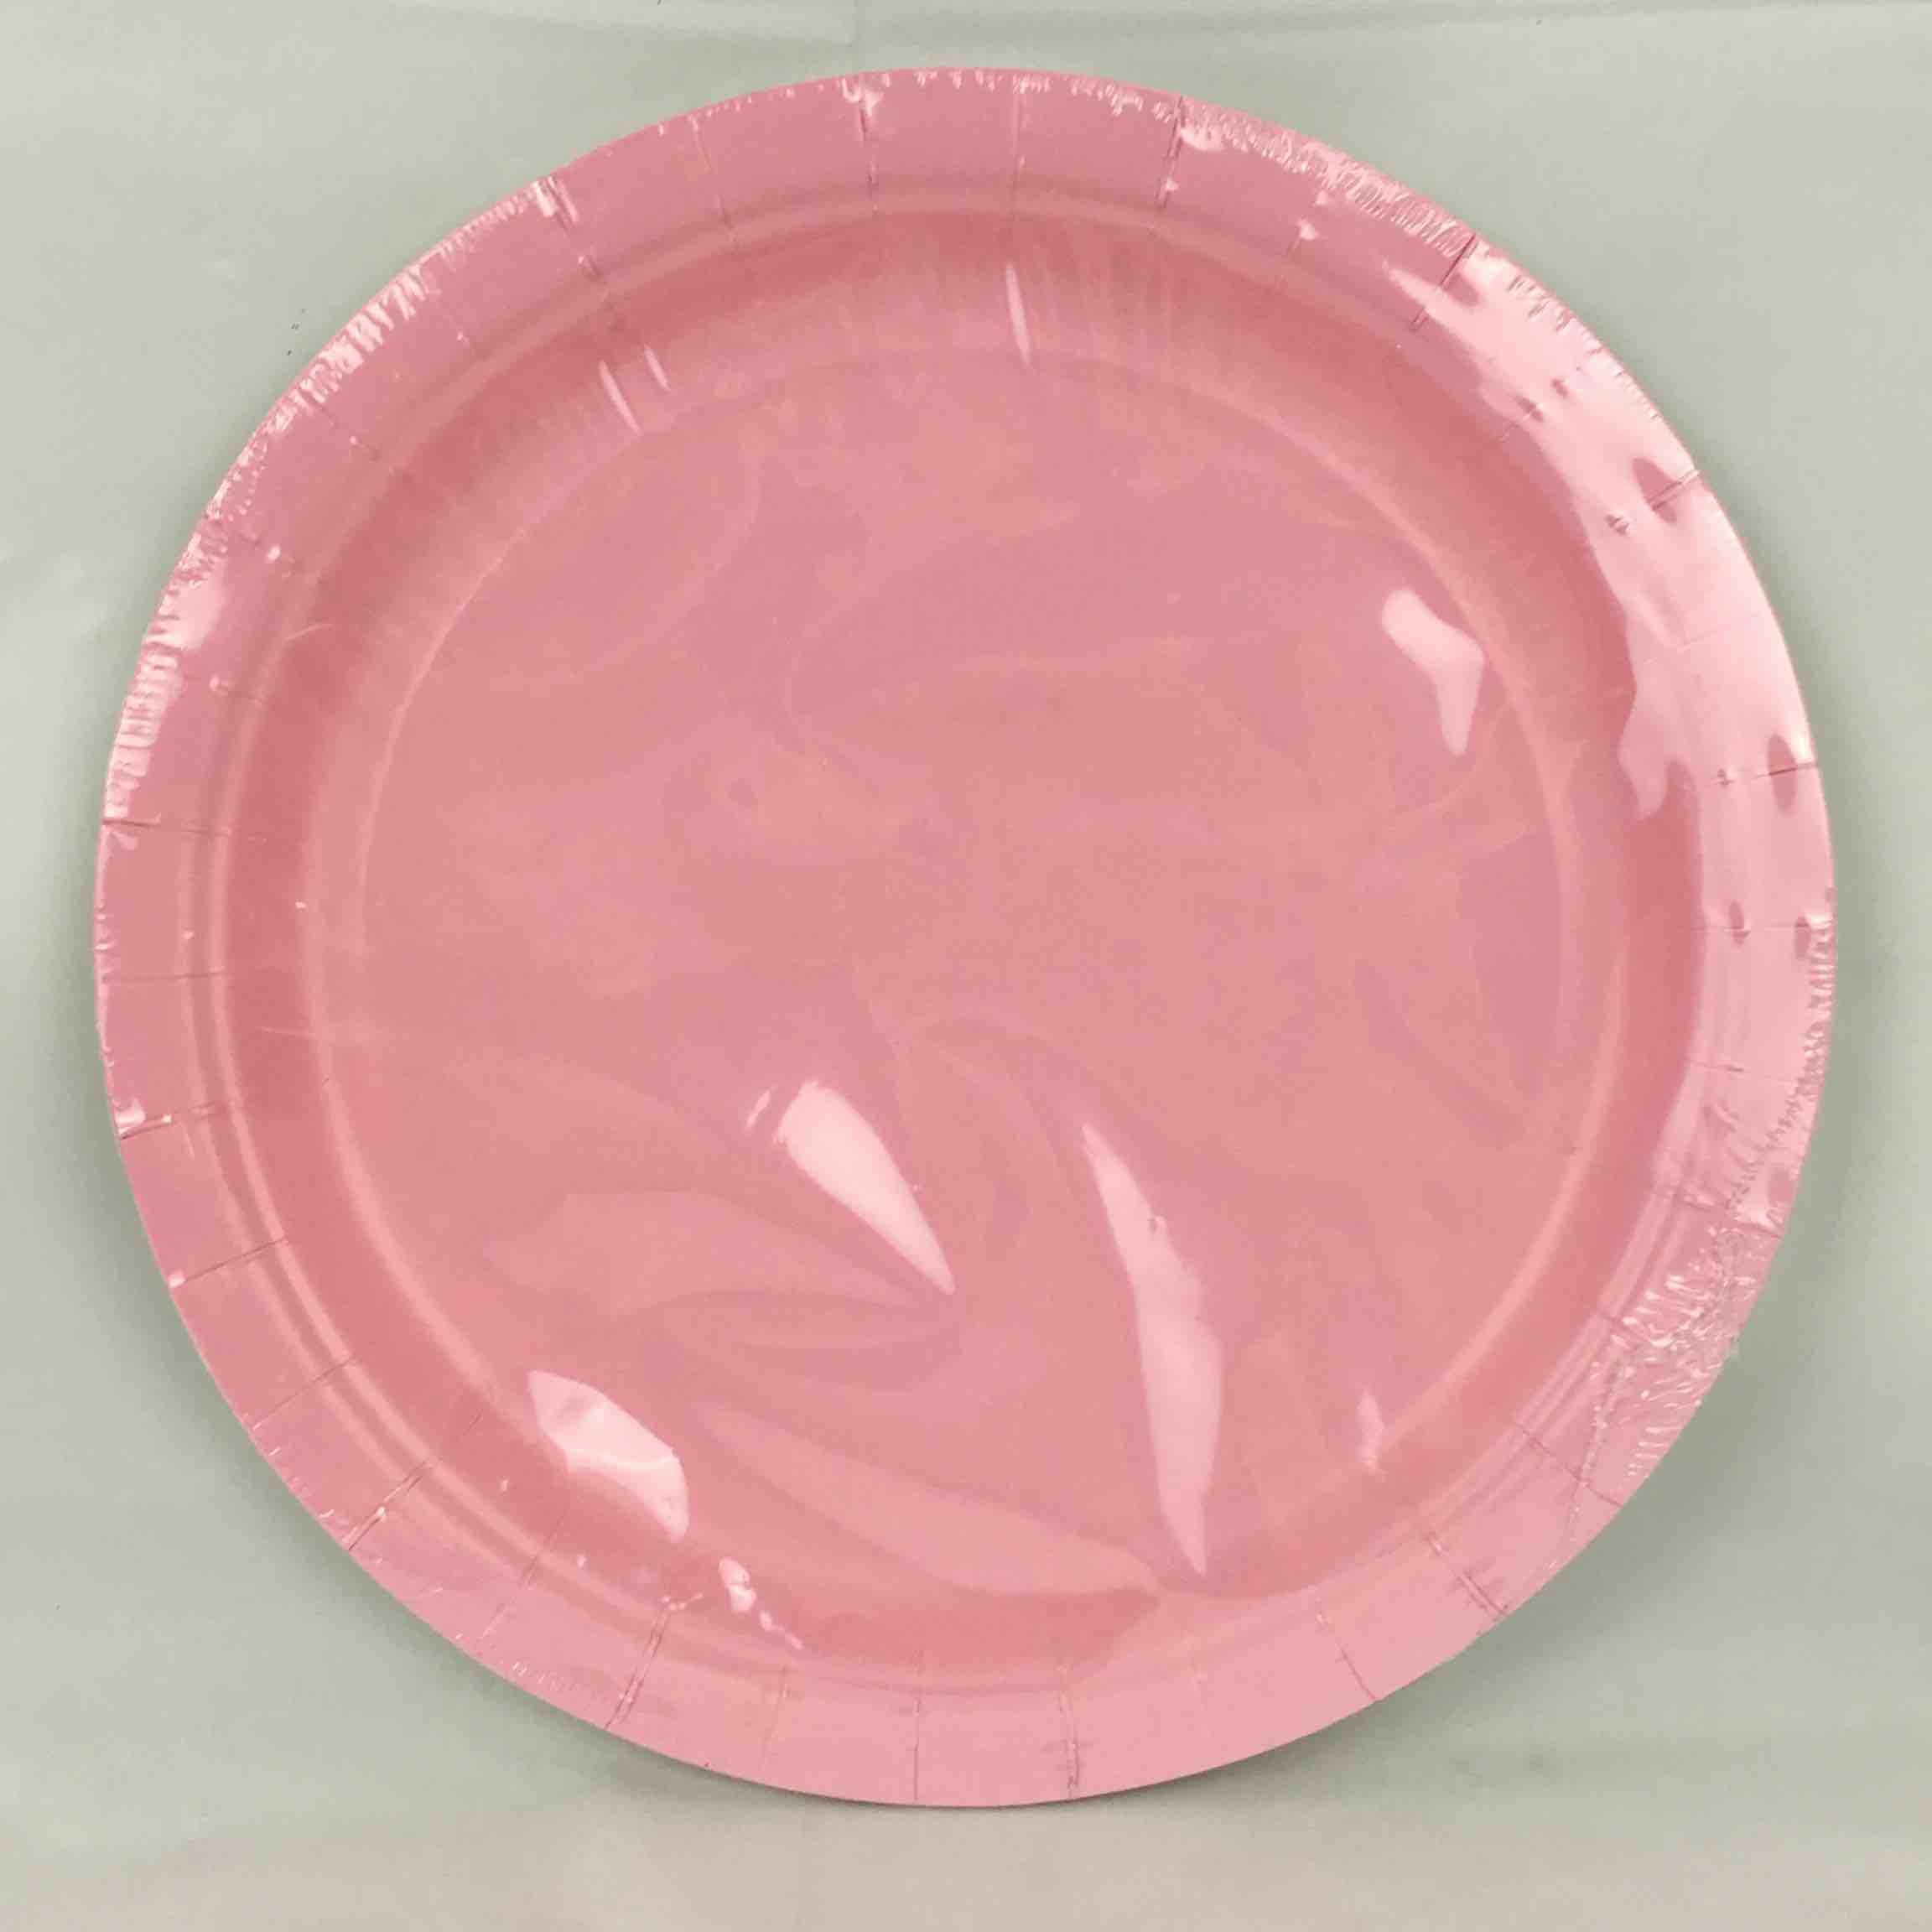 SOLID PASTEL PINK PLATES 9in  8pcs